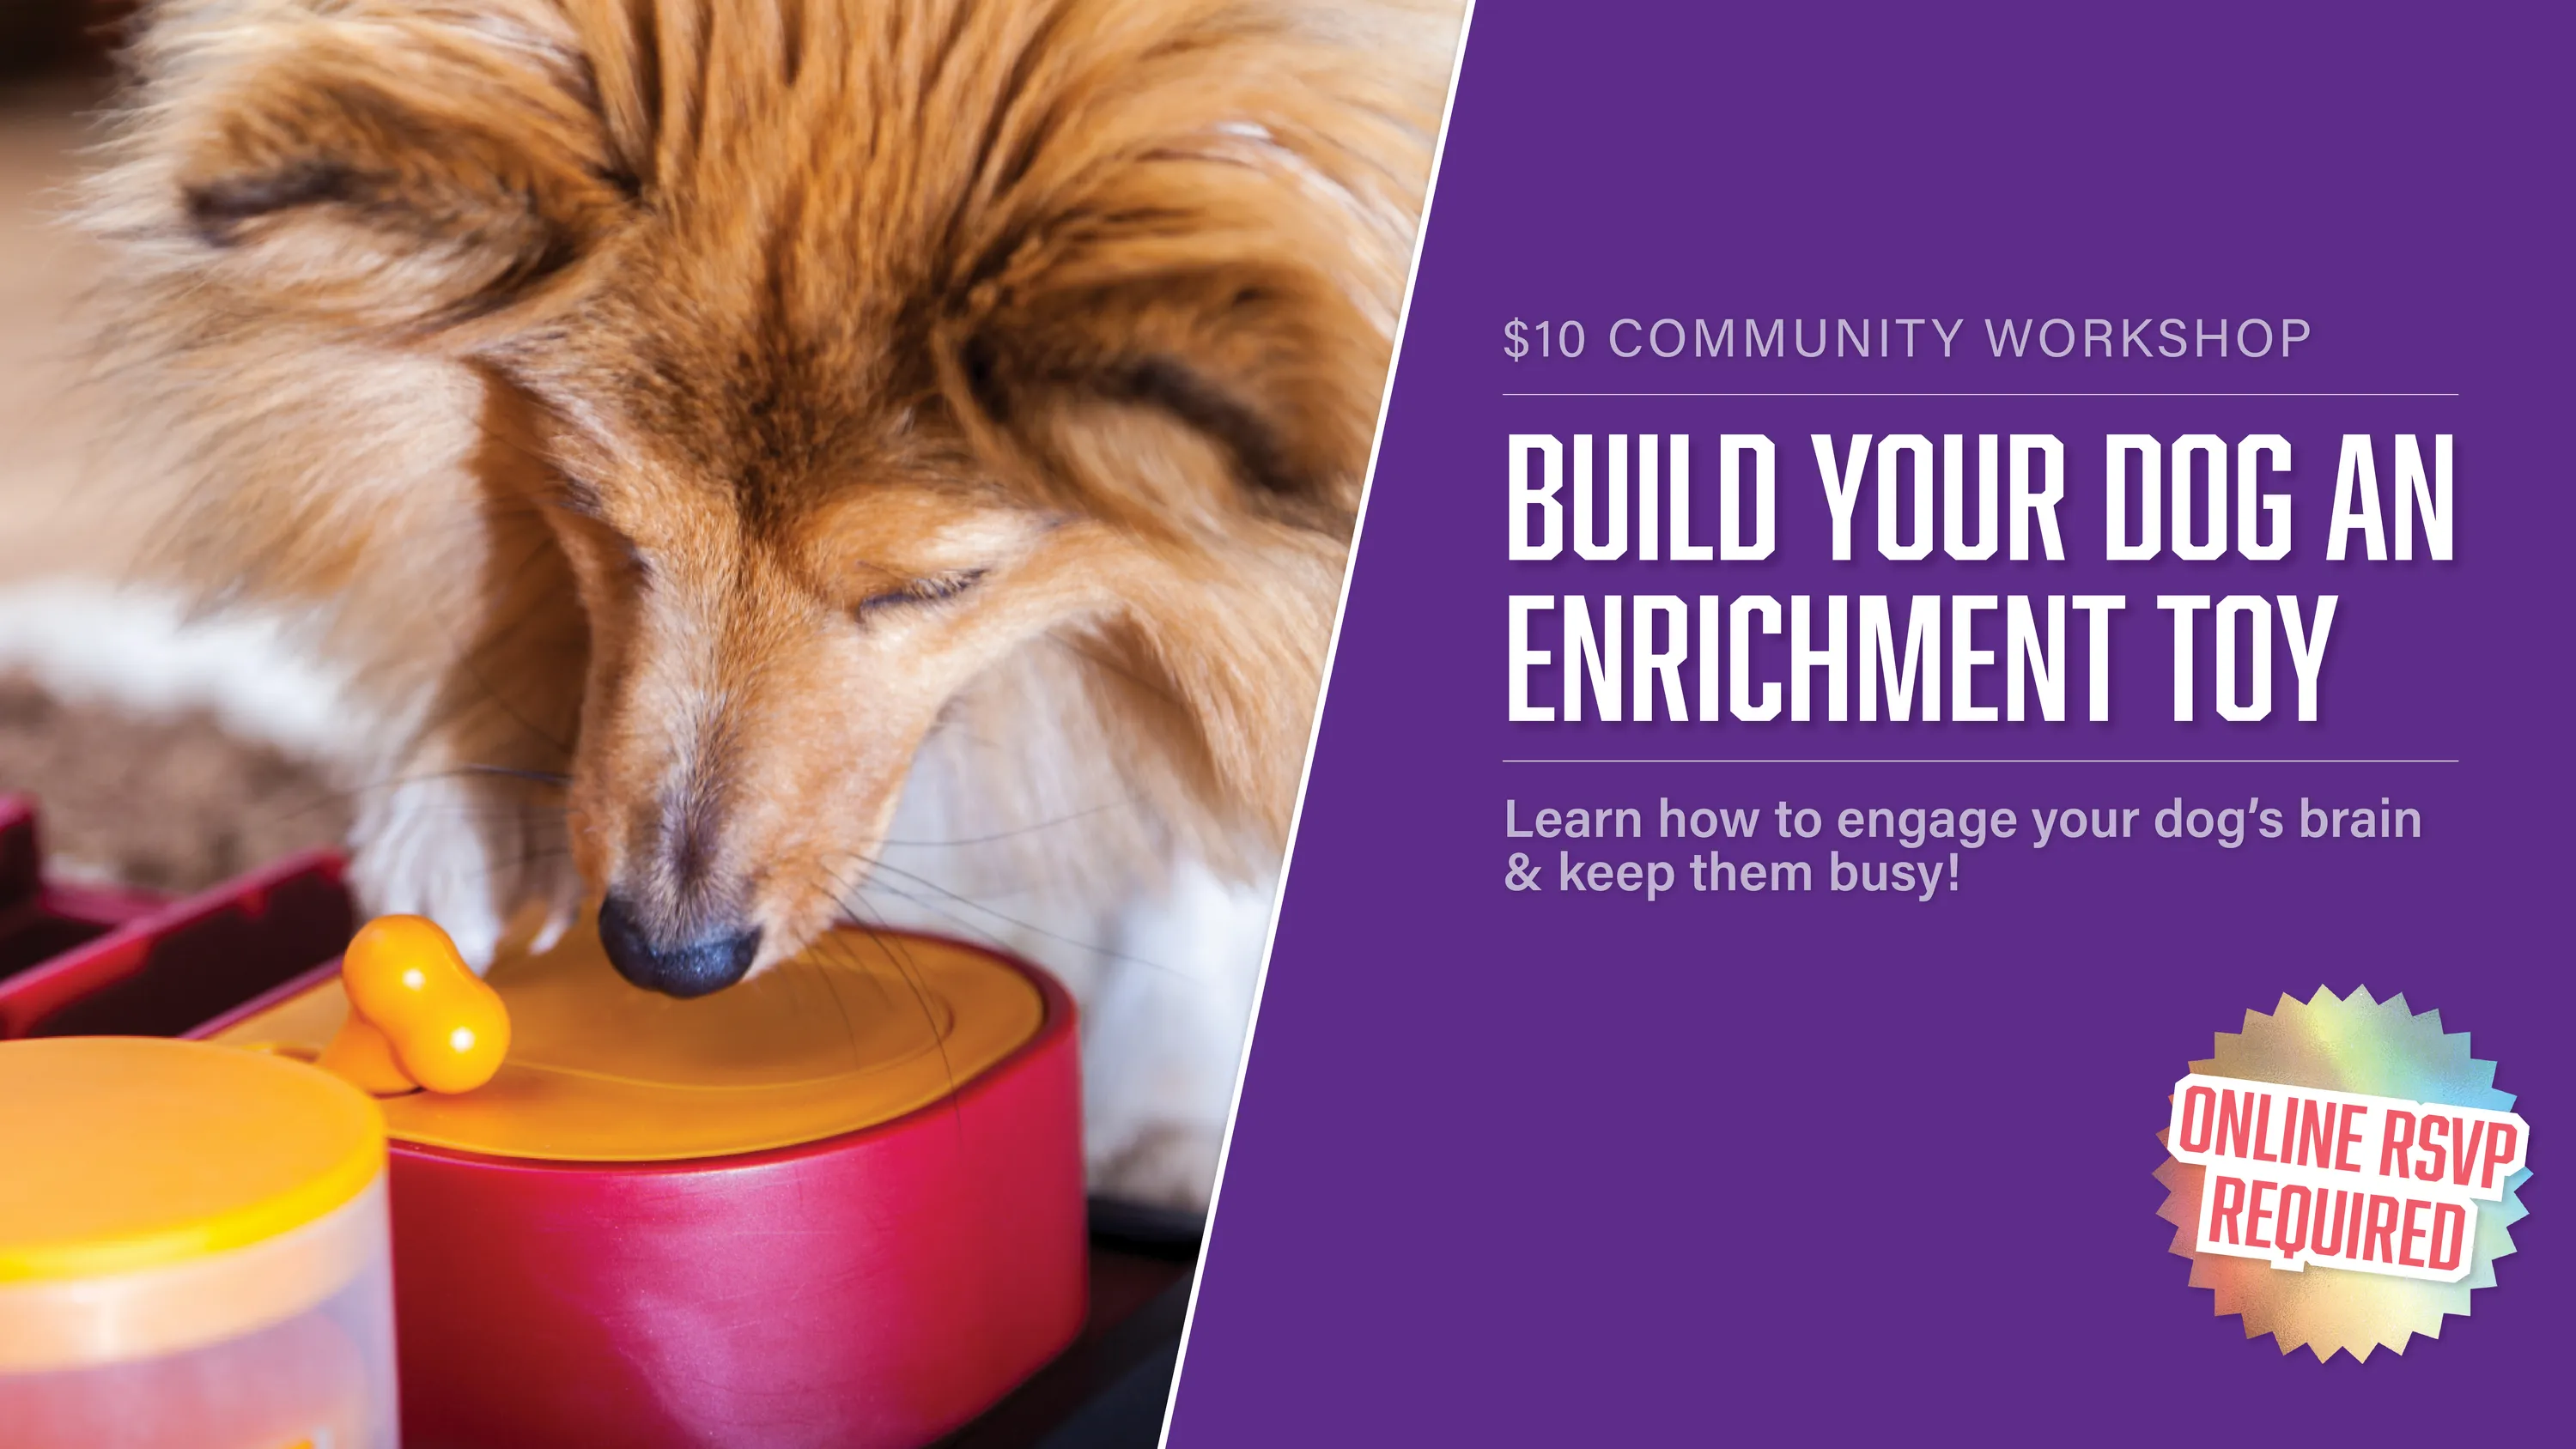 Build Your Dog An Enrichment Toy